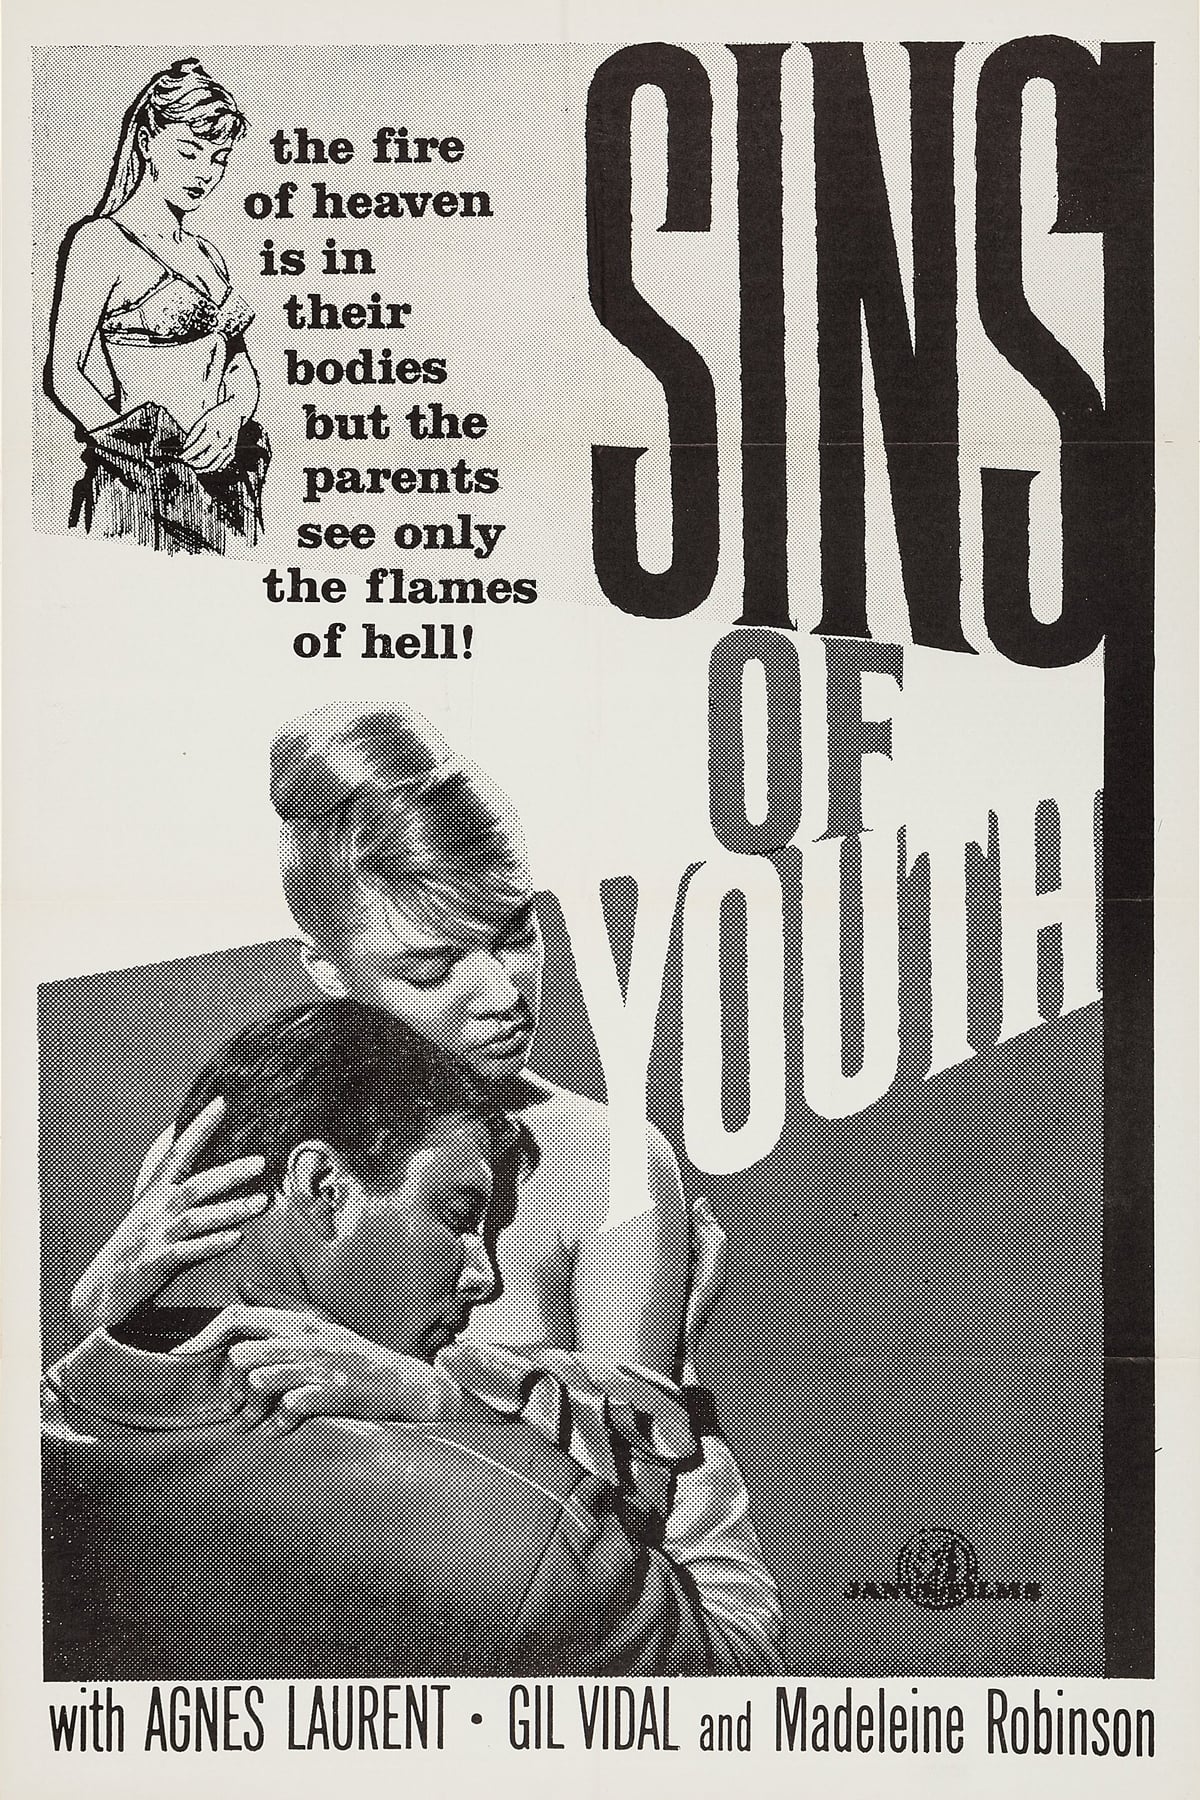 Sins of Youth